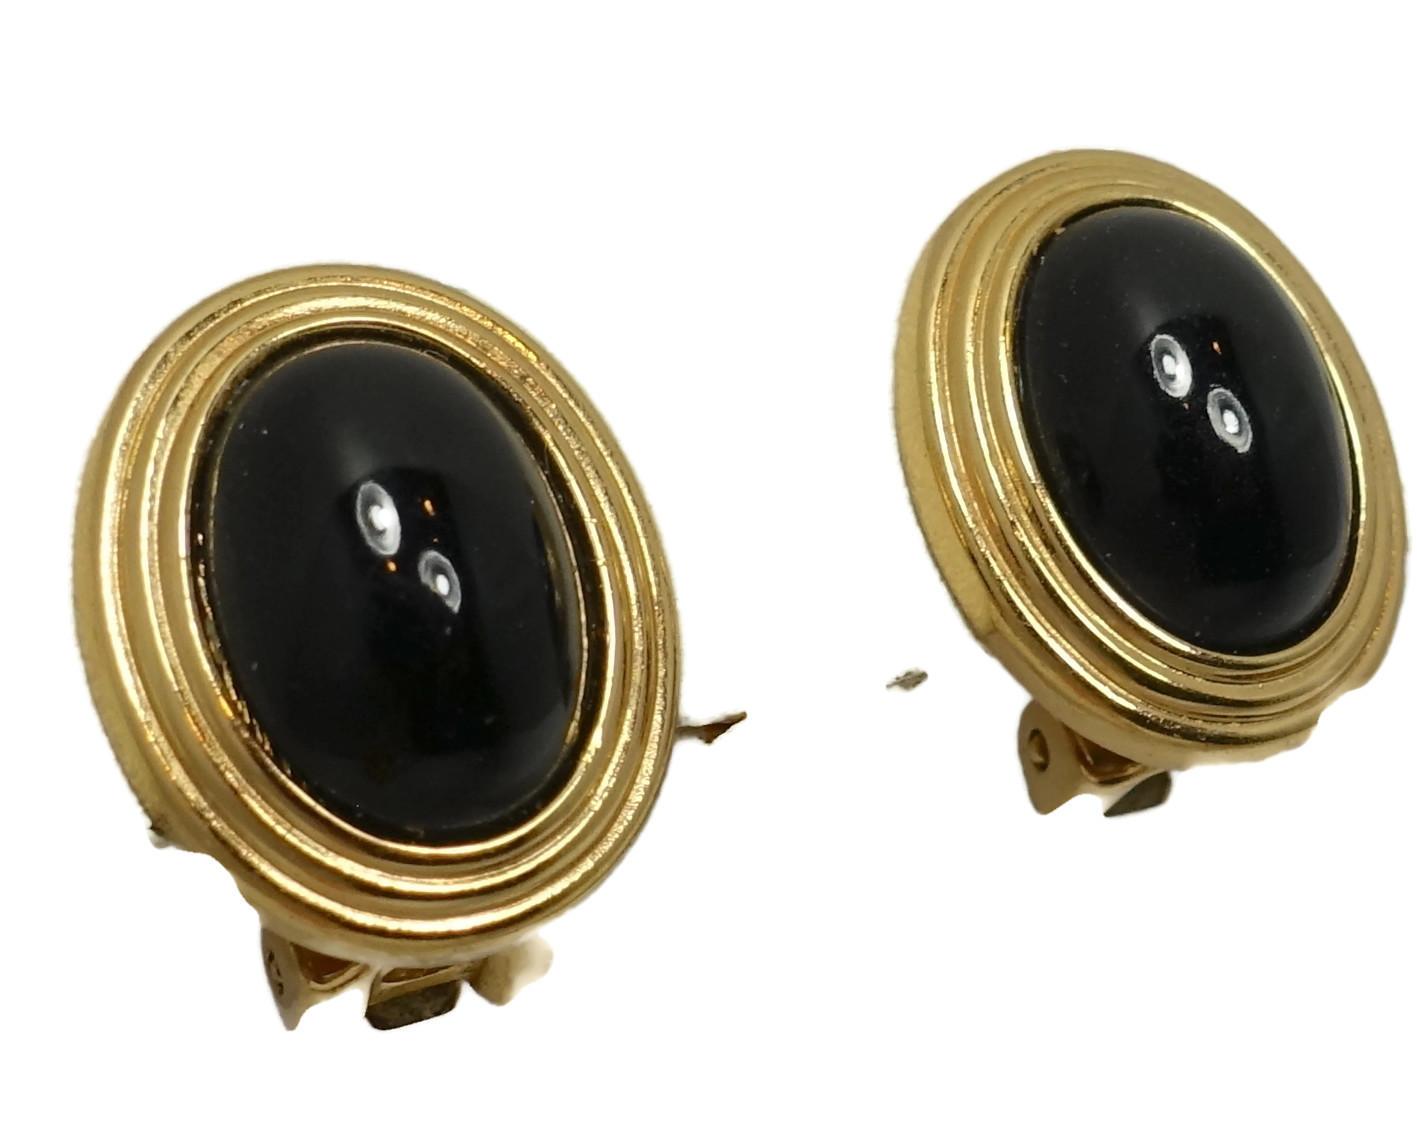 These vintage signed Christian Dior earrings feature black cabochon stones in a gold tone setting.  In excellent condition, these clip earrings measure 3/4” x 5/8” and are signed “Chr.Dior”.